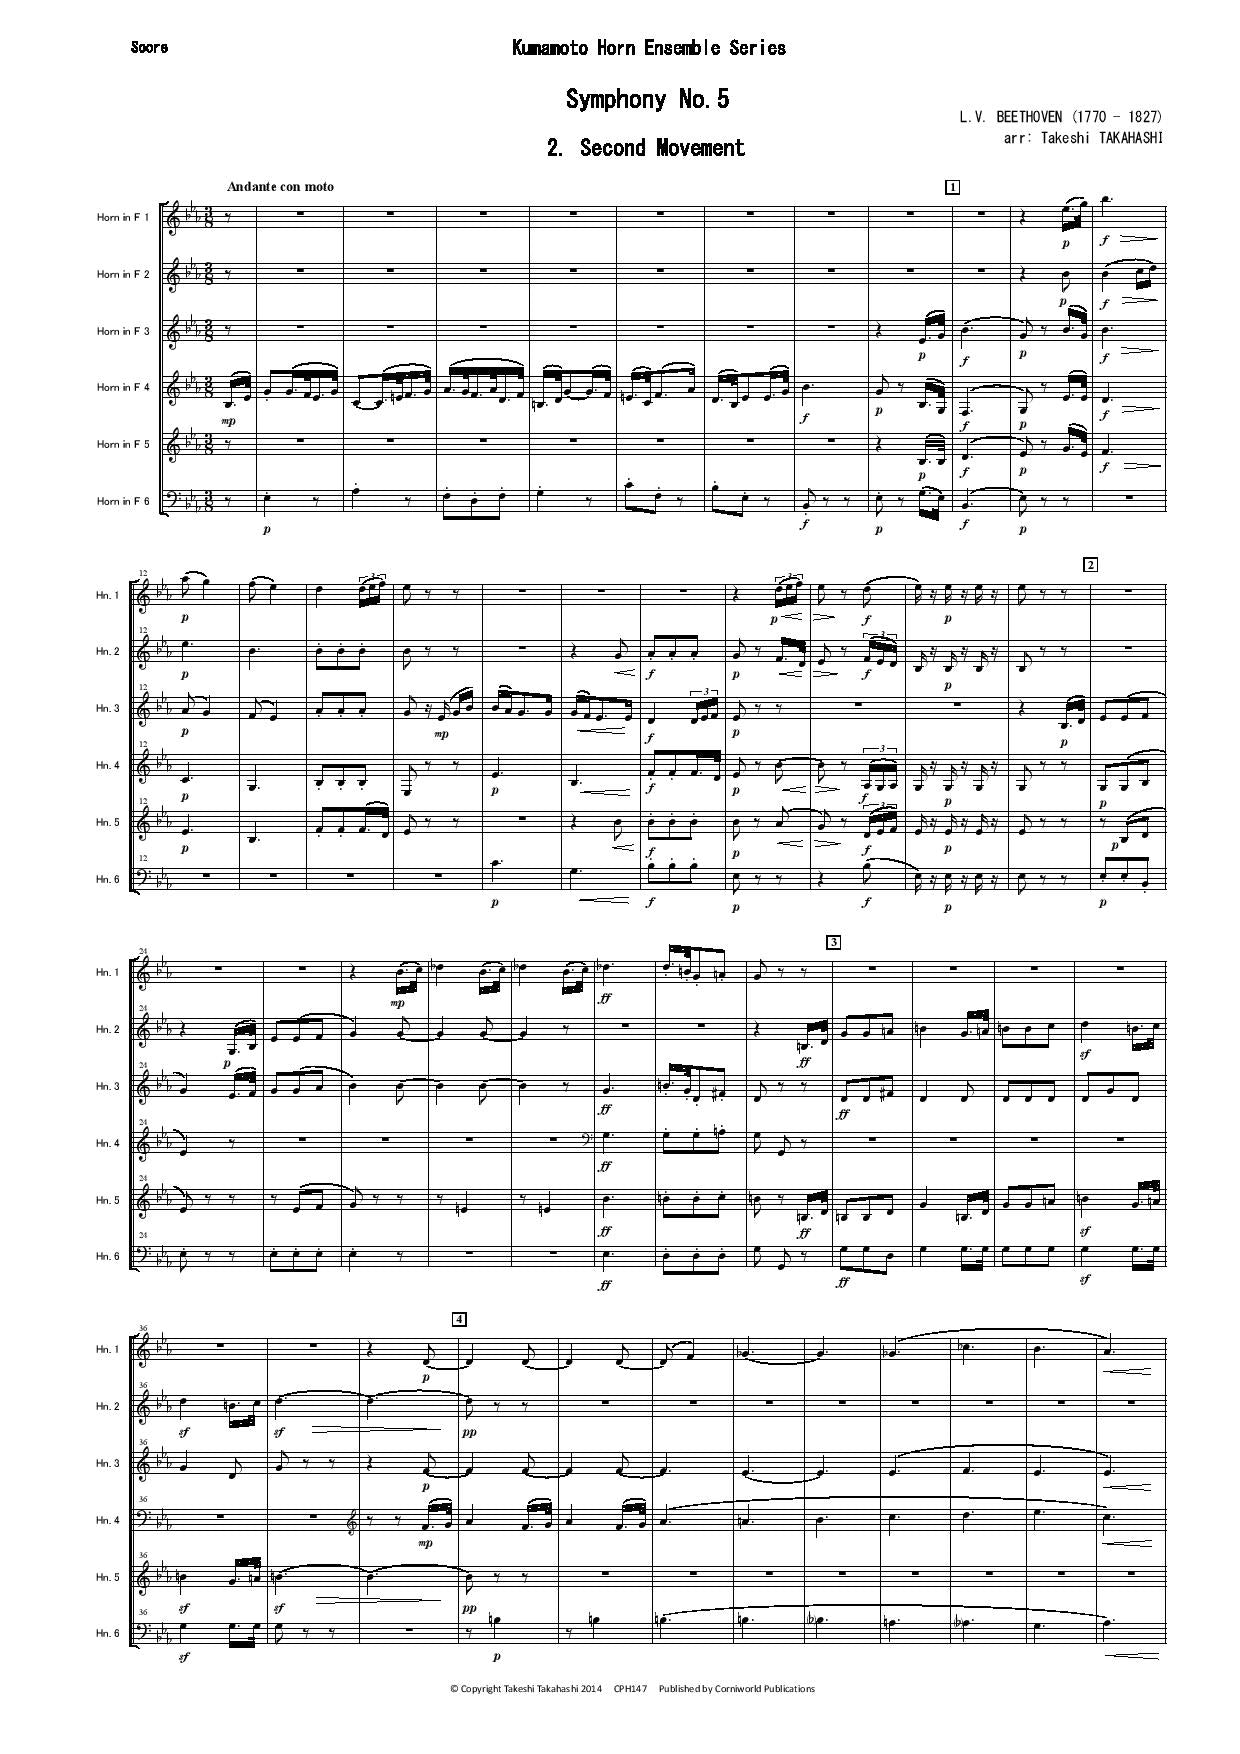 2nd Mvt from Symphony No.5 (Beethoven) CPH147